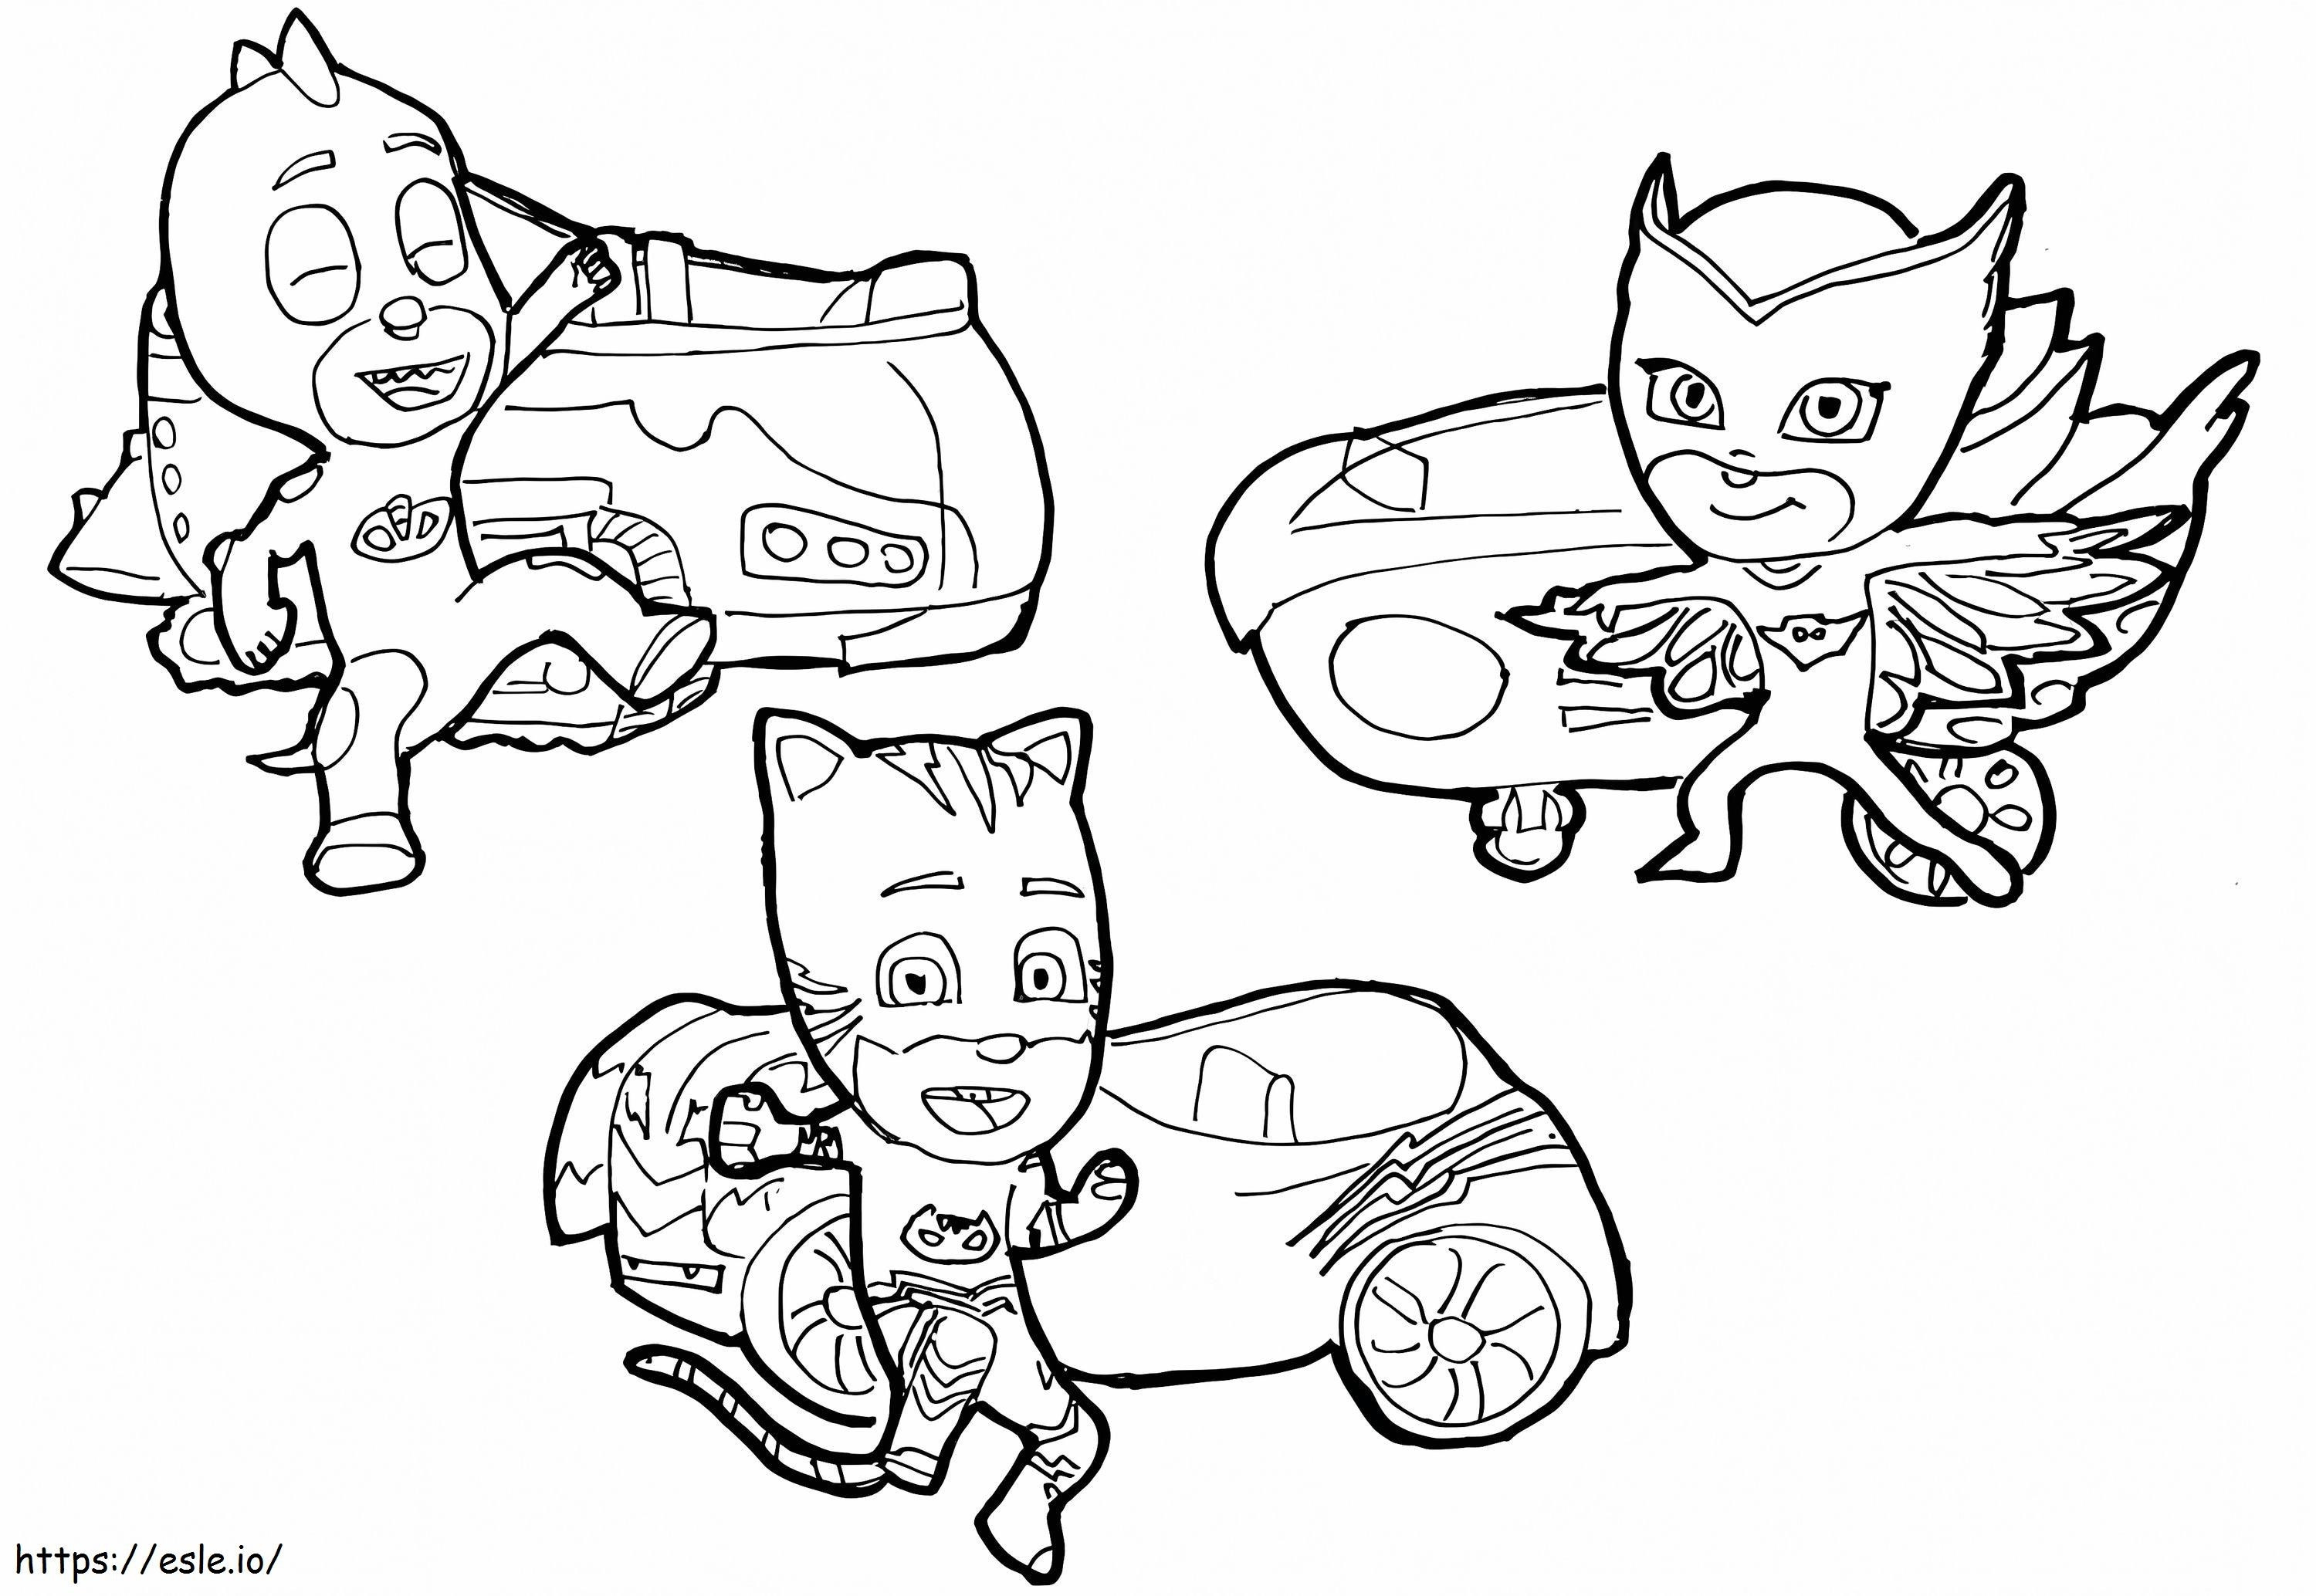 Awesome PJ Masks coloring page